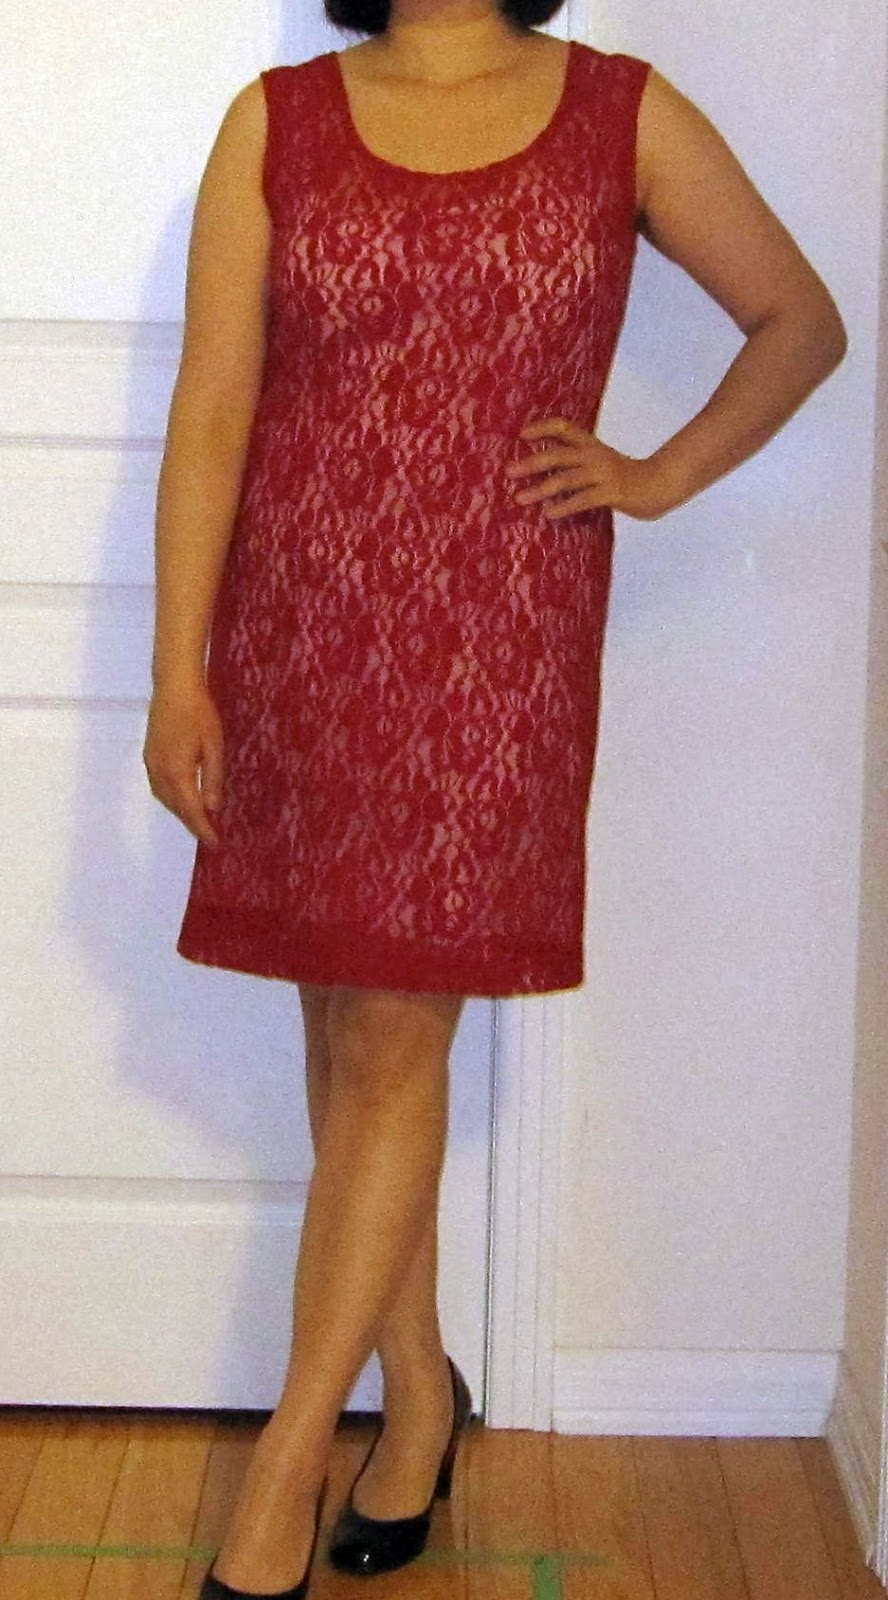 Frou Frou by lovenicky: Refashioned: Red lace dress got sleeves!